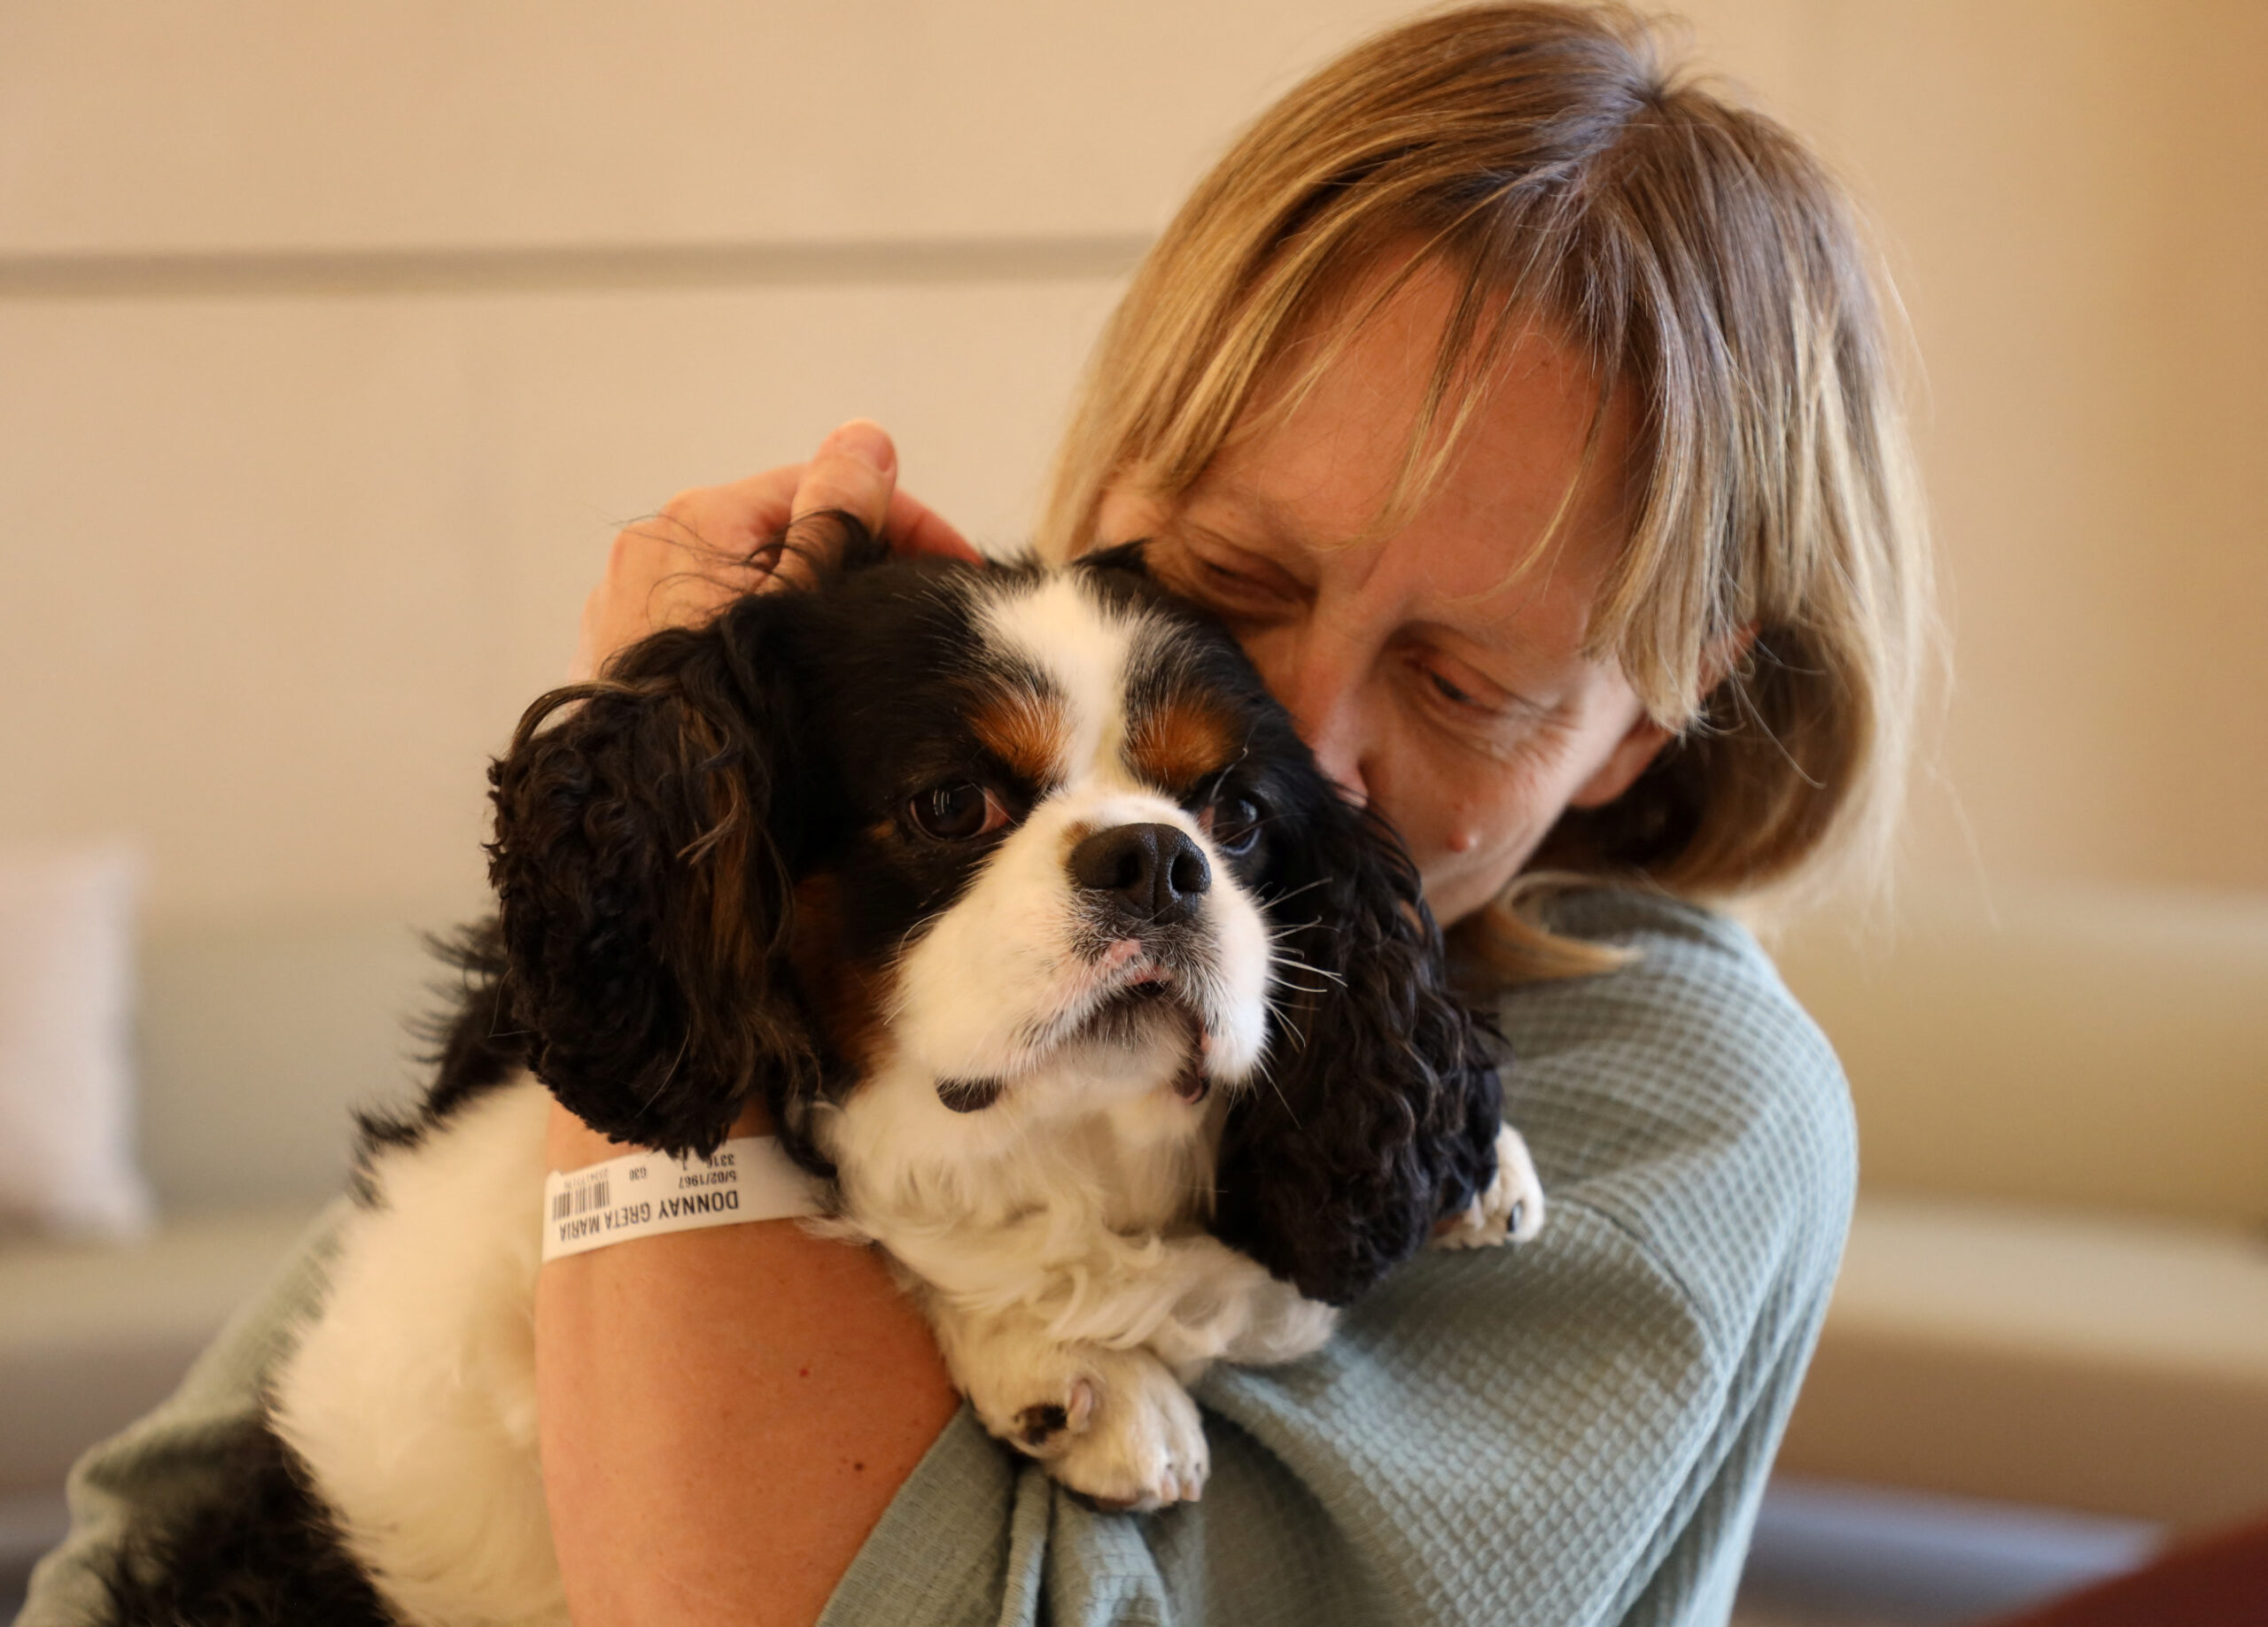 Belgian hospital pioneers pet visits to patients | Inquirer News